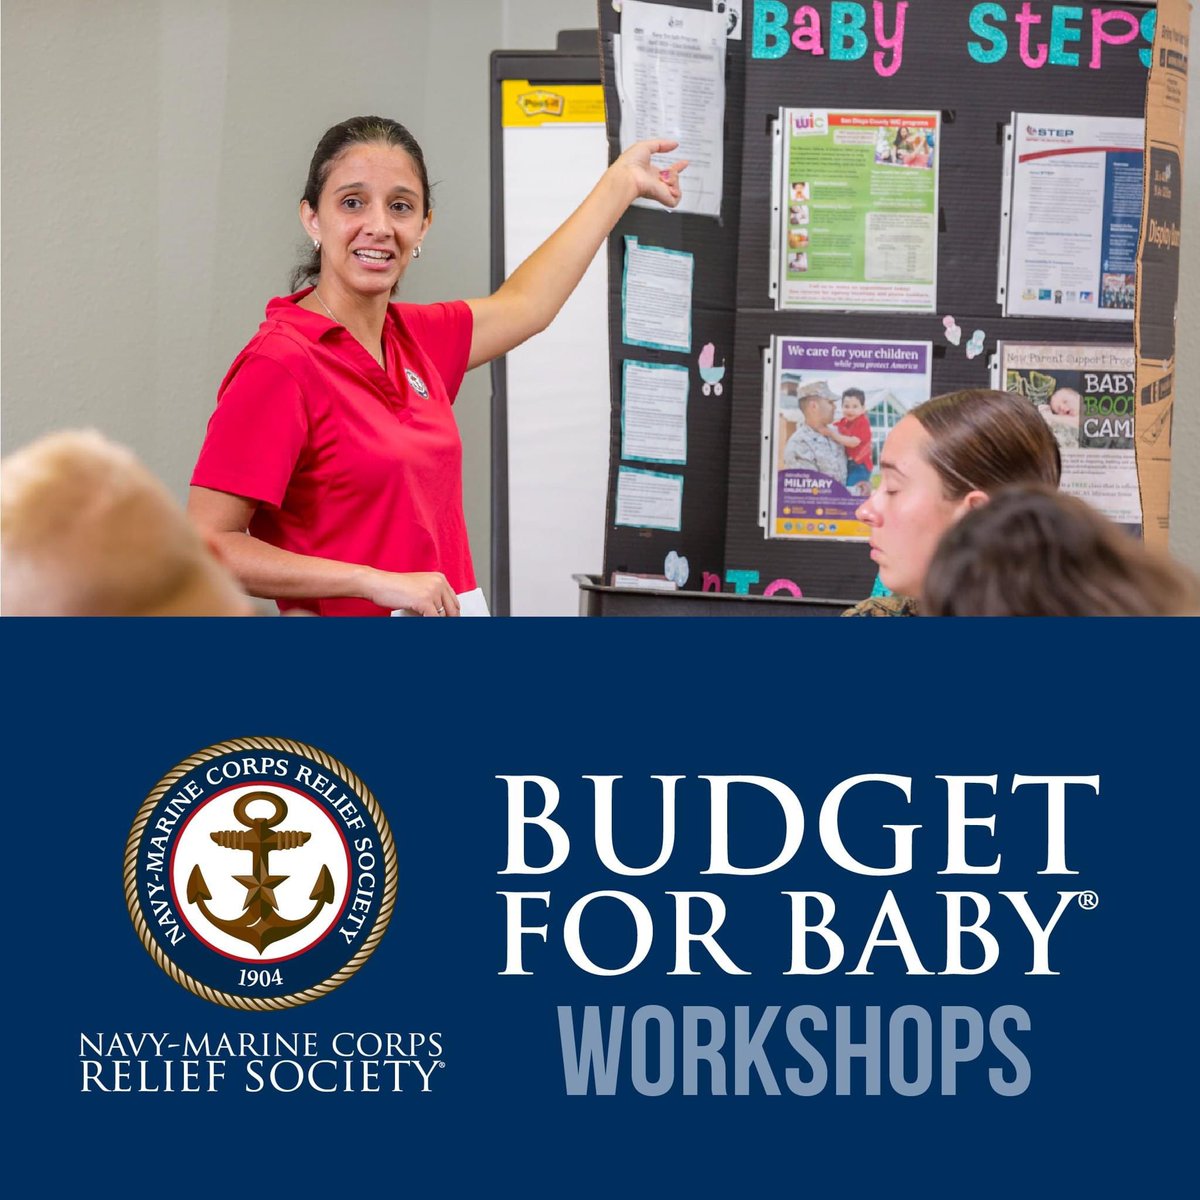 NMCRS helps Sea Service families through life's significant events, including a new baby! Our free Budget for Baby® workshop focuses on financial planning for the arrival of your little one.
Sign up today- tinyurl.com/budget4baby. 

#BudgetforBaby #MilitaryFamily #MilitarySpouse